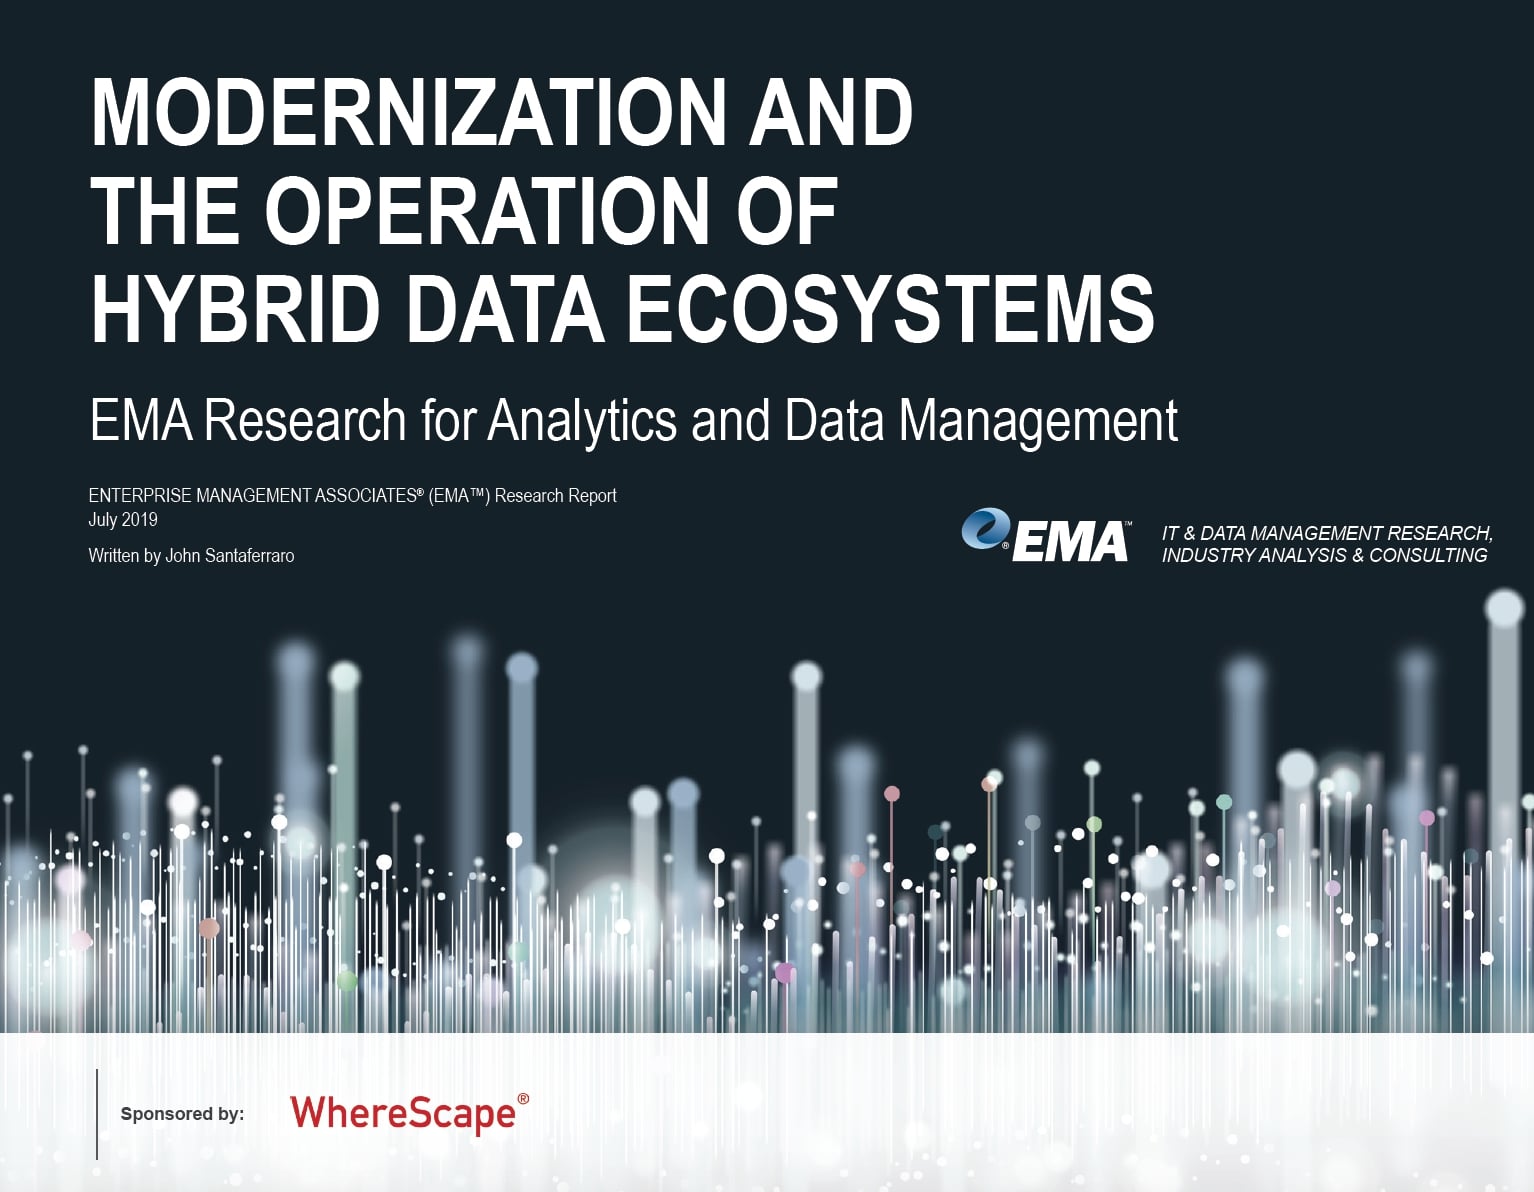 EMA Research: Modernization and the Operation of Hybrid Data Ecosystems